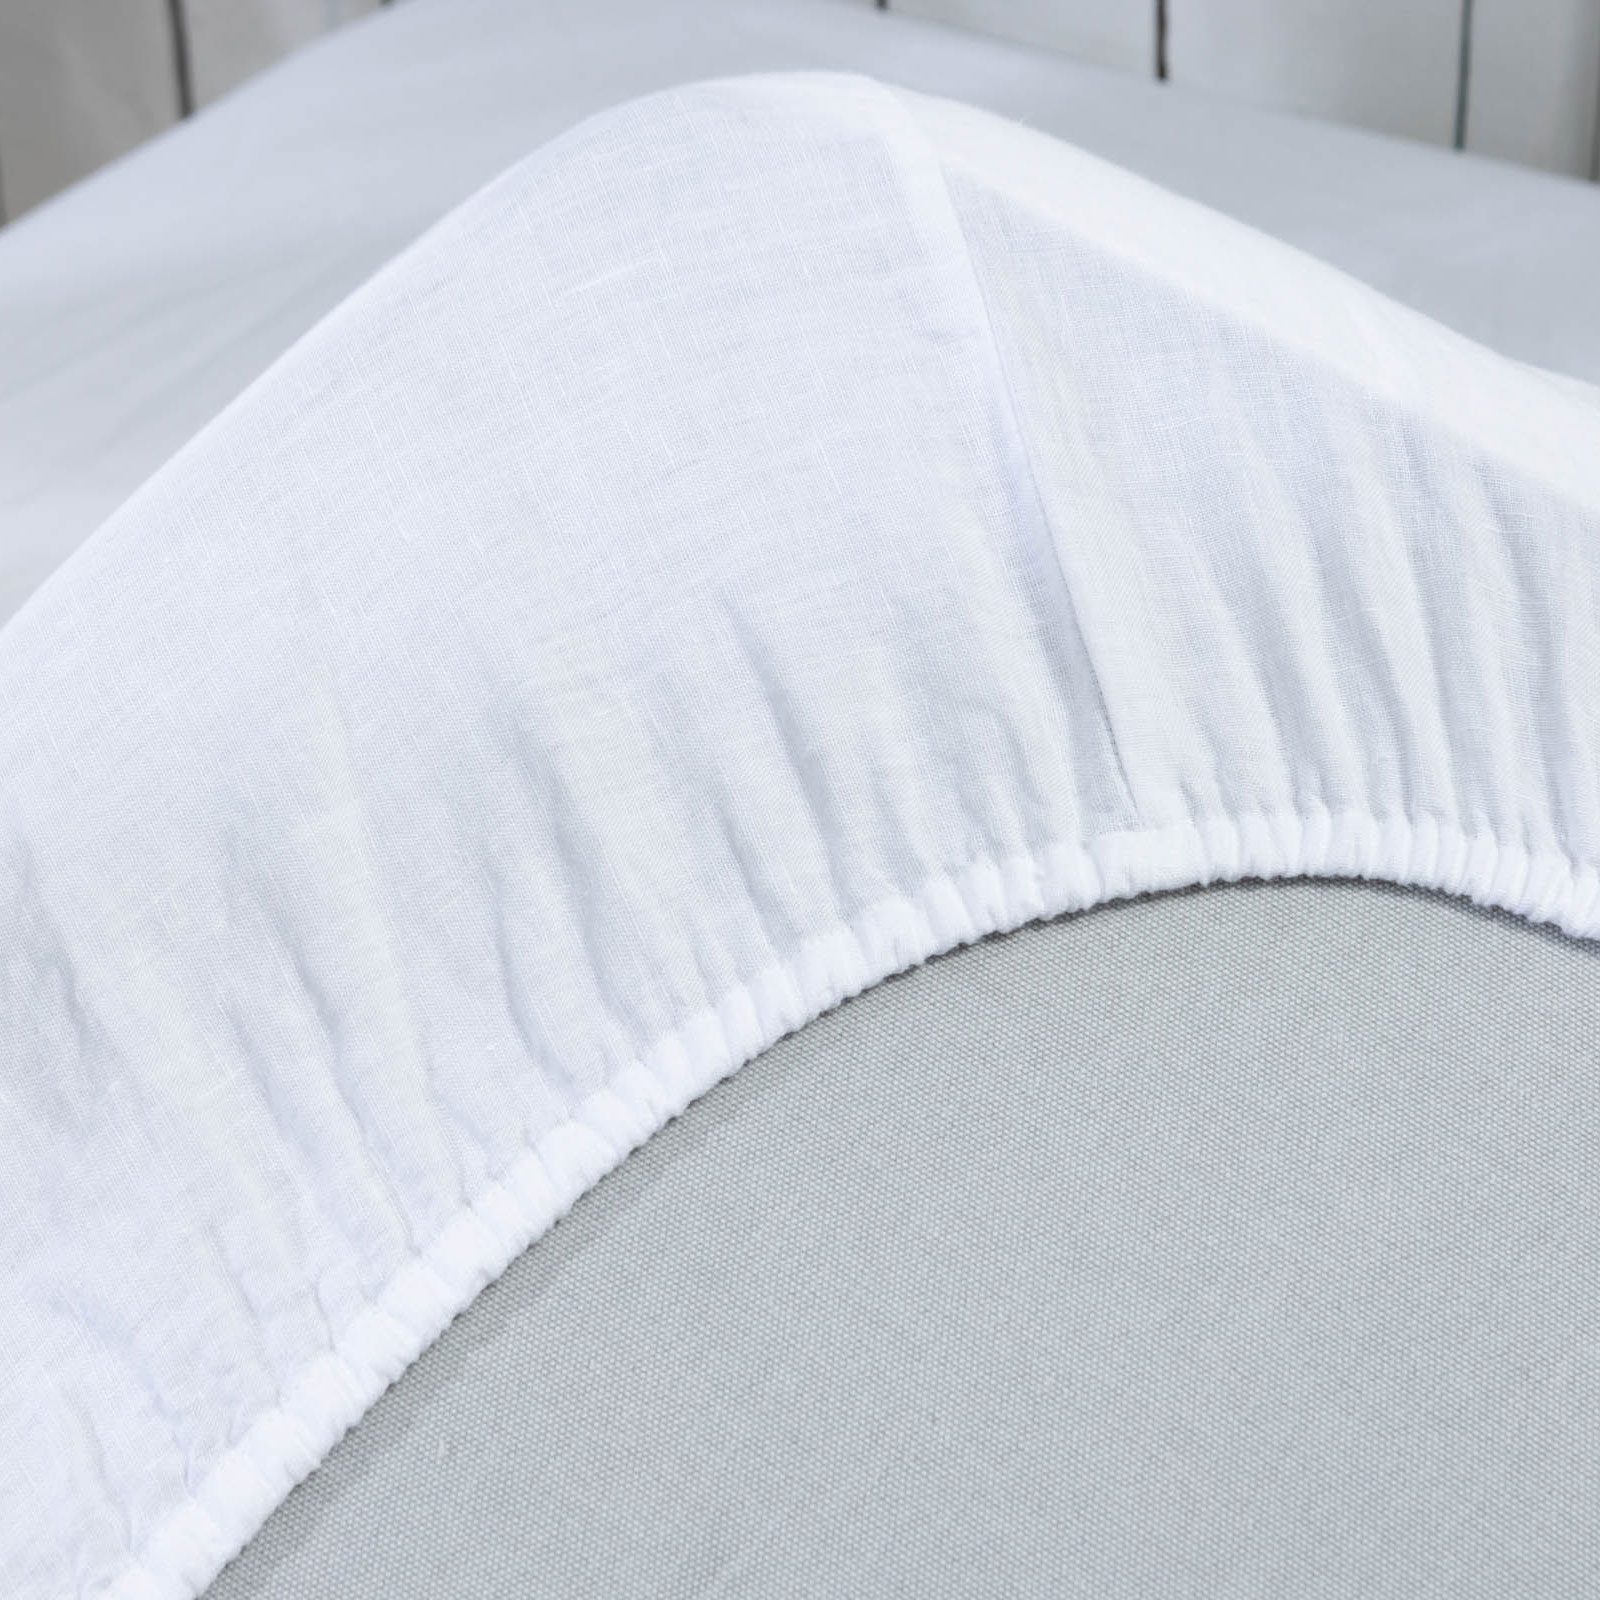 stone-washed-linen-fitted-sheet-snow-white-3